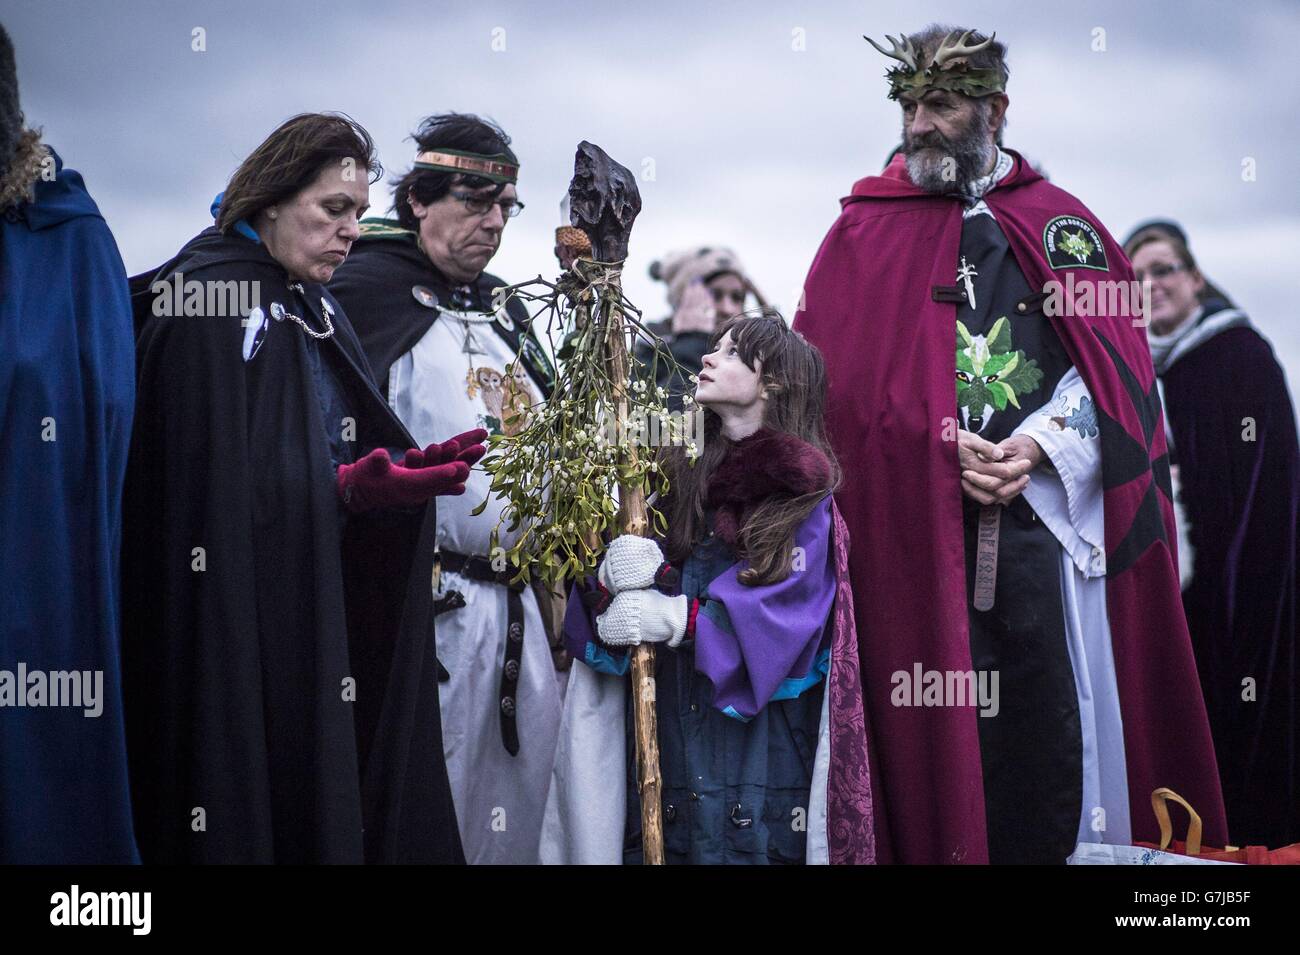 Druids at Stonehenge, Witshire, where people are gathering to celebrate the Winter solstice. Stock Photo